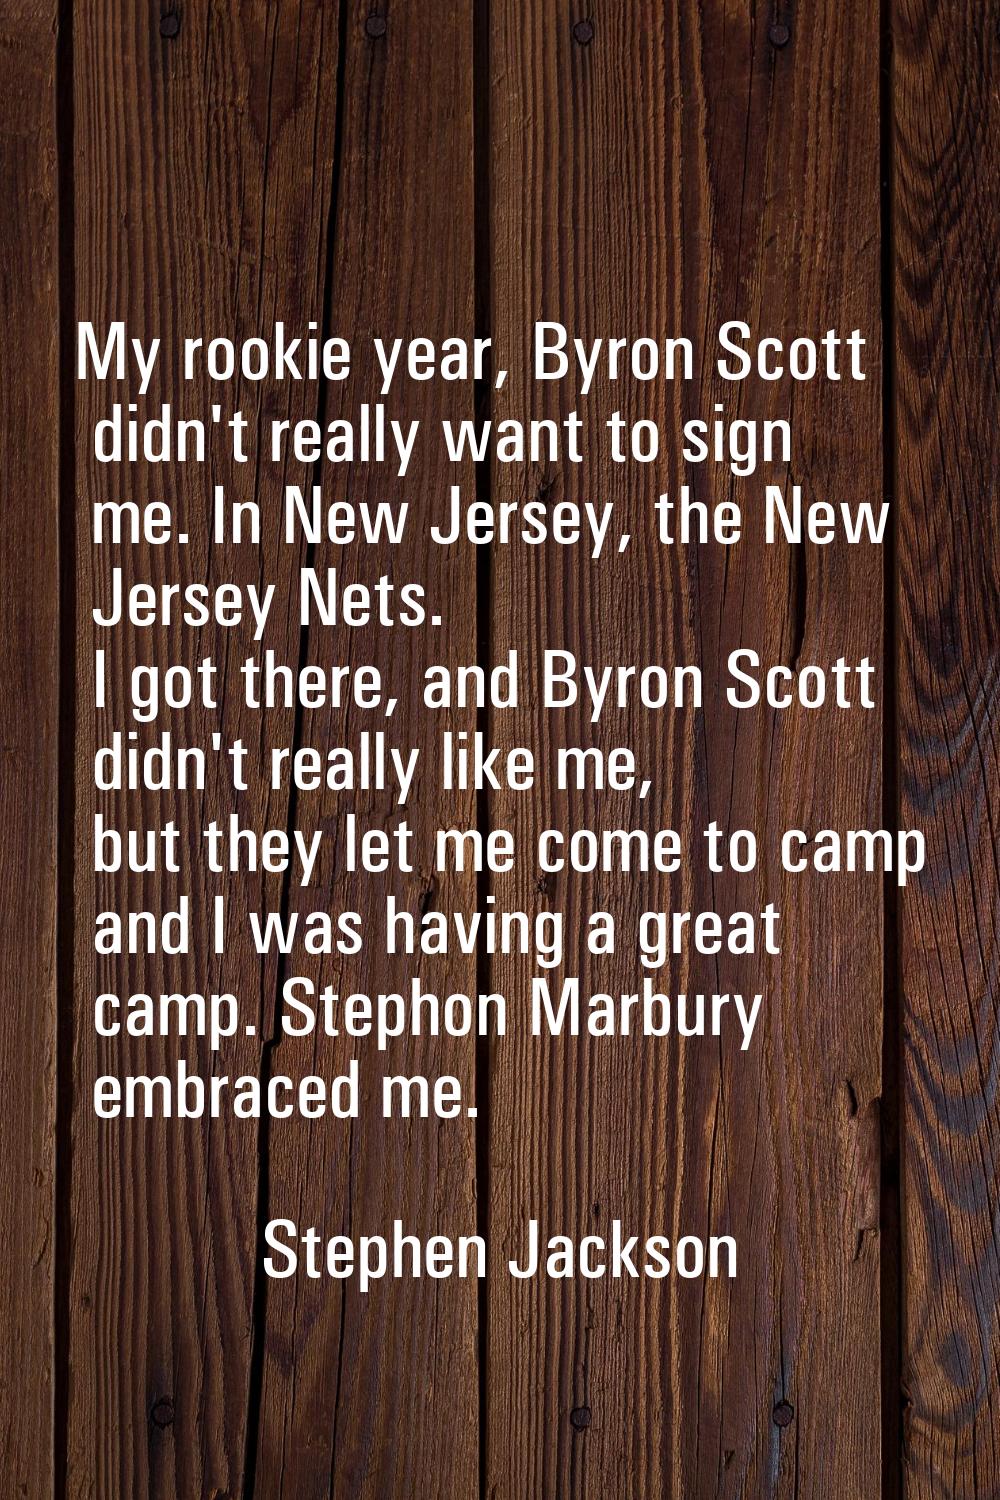 My rookie year, Byron Scott didn't really want to sign me. In New Jersey, the New Jersey Nets. I go